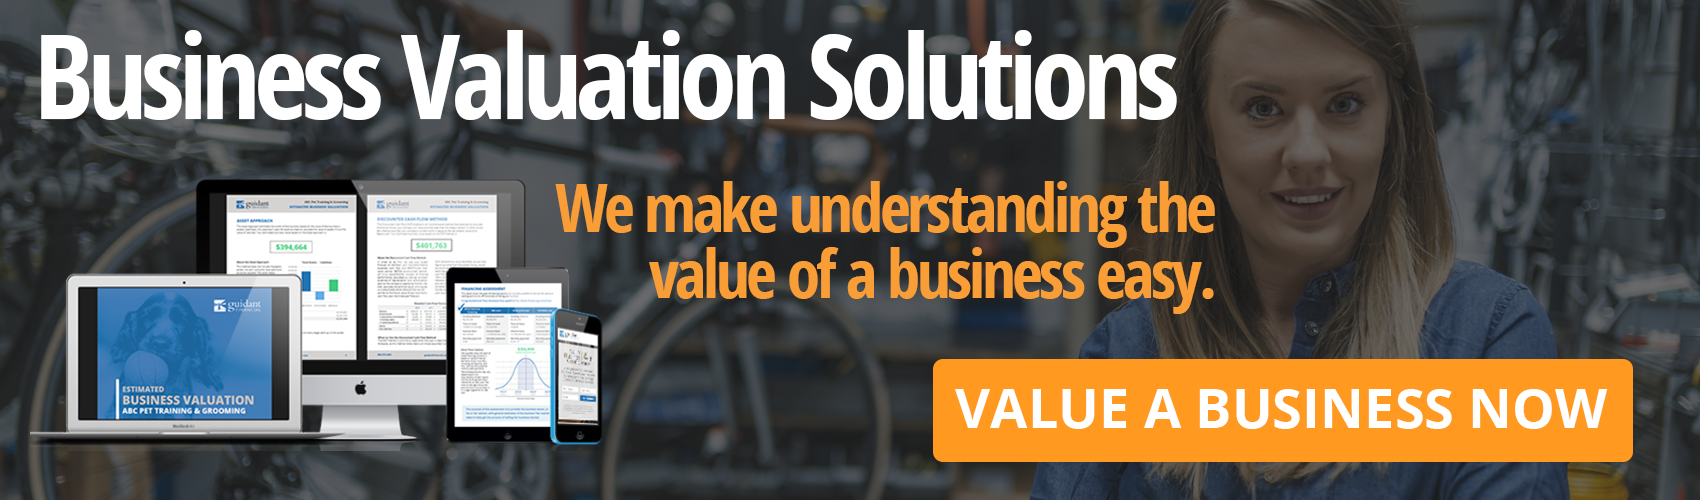 Banner image for Guidant's Business Valuation Solutions